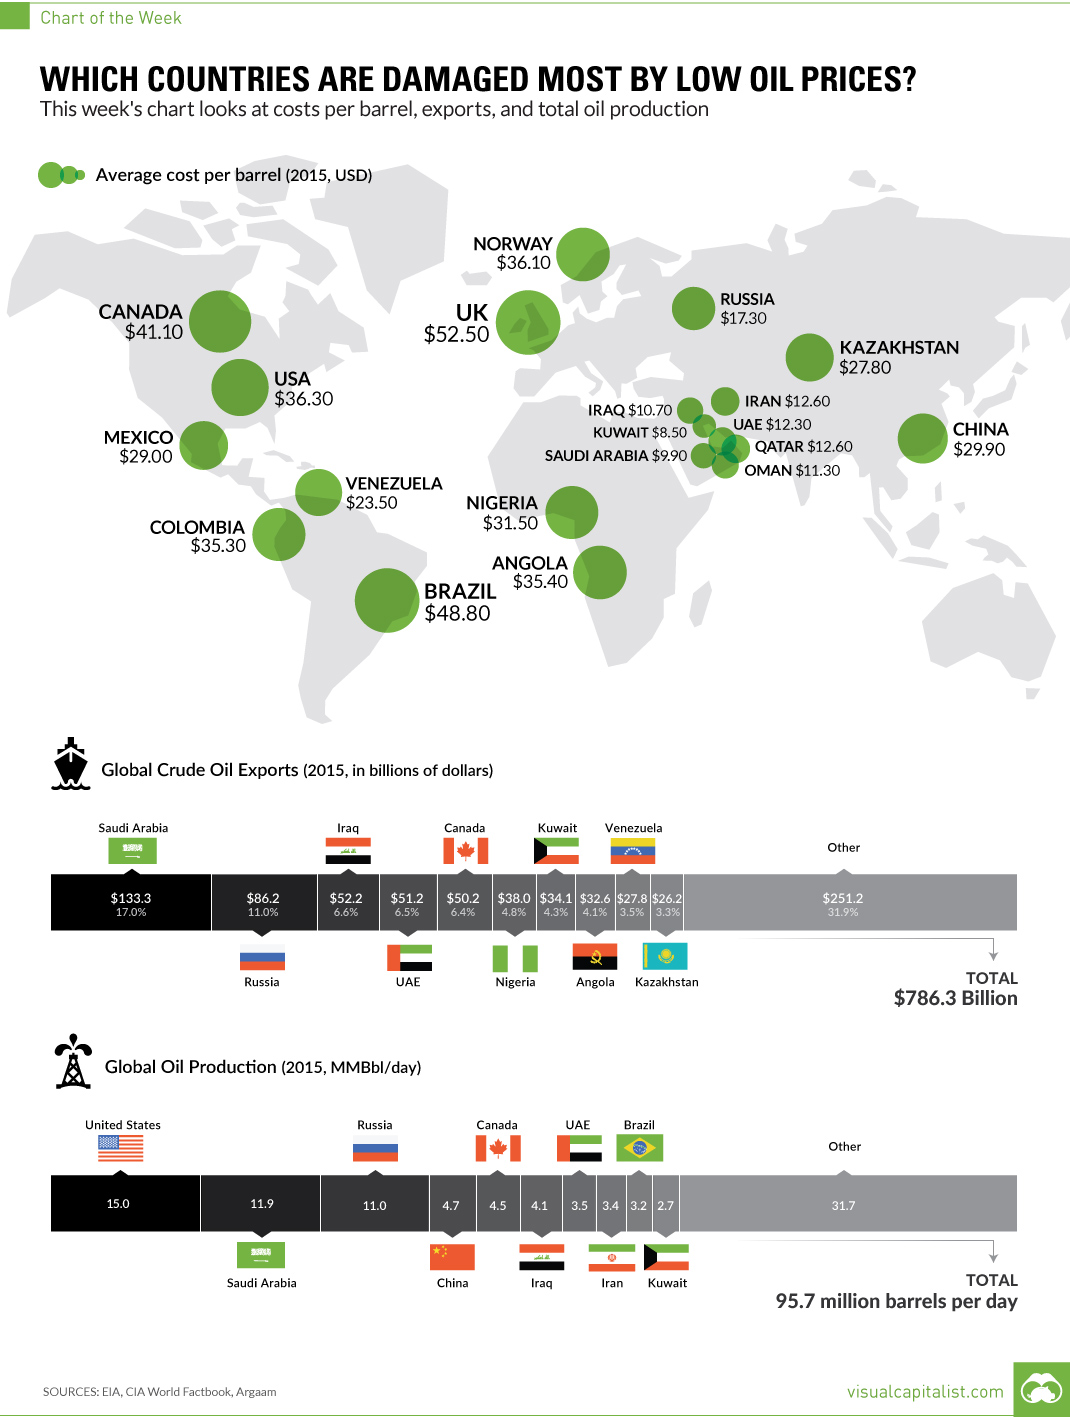 Chart: Which Countries Are Damaged Most by Low Oil Prices?